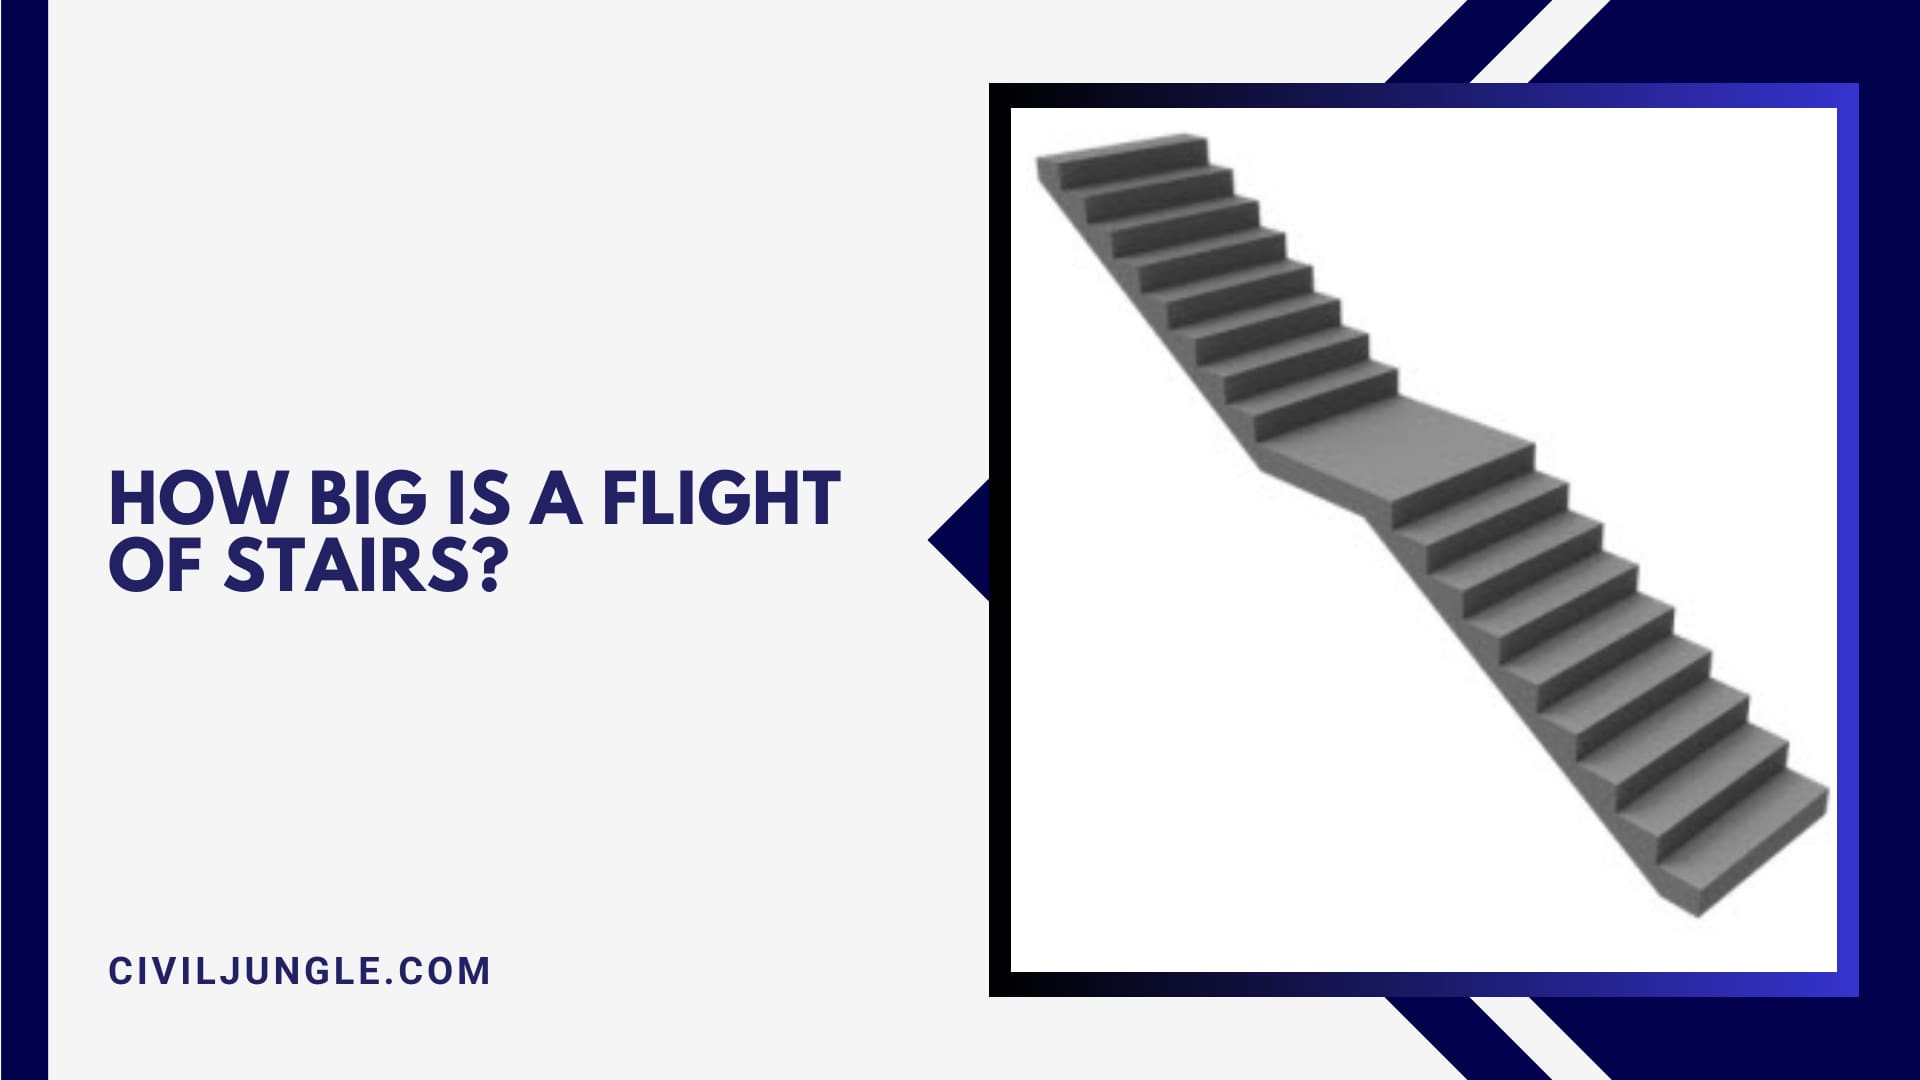 How Big Is a Flight of Stairs?